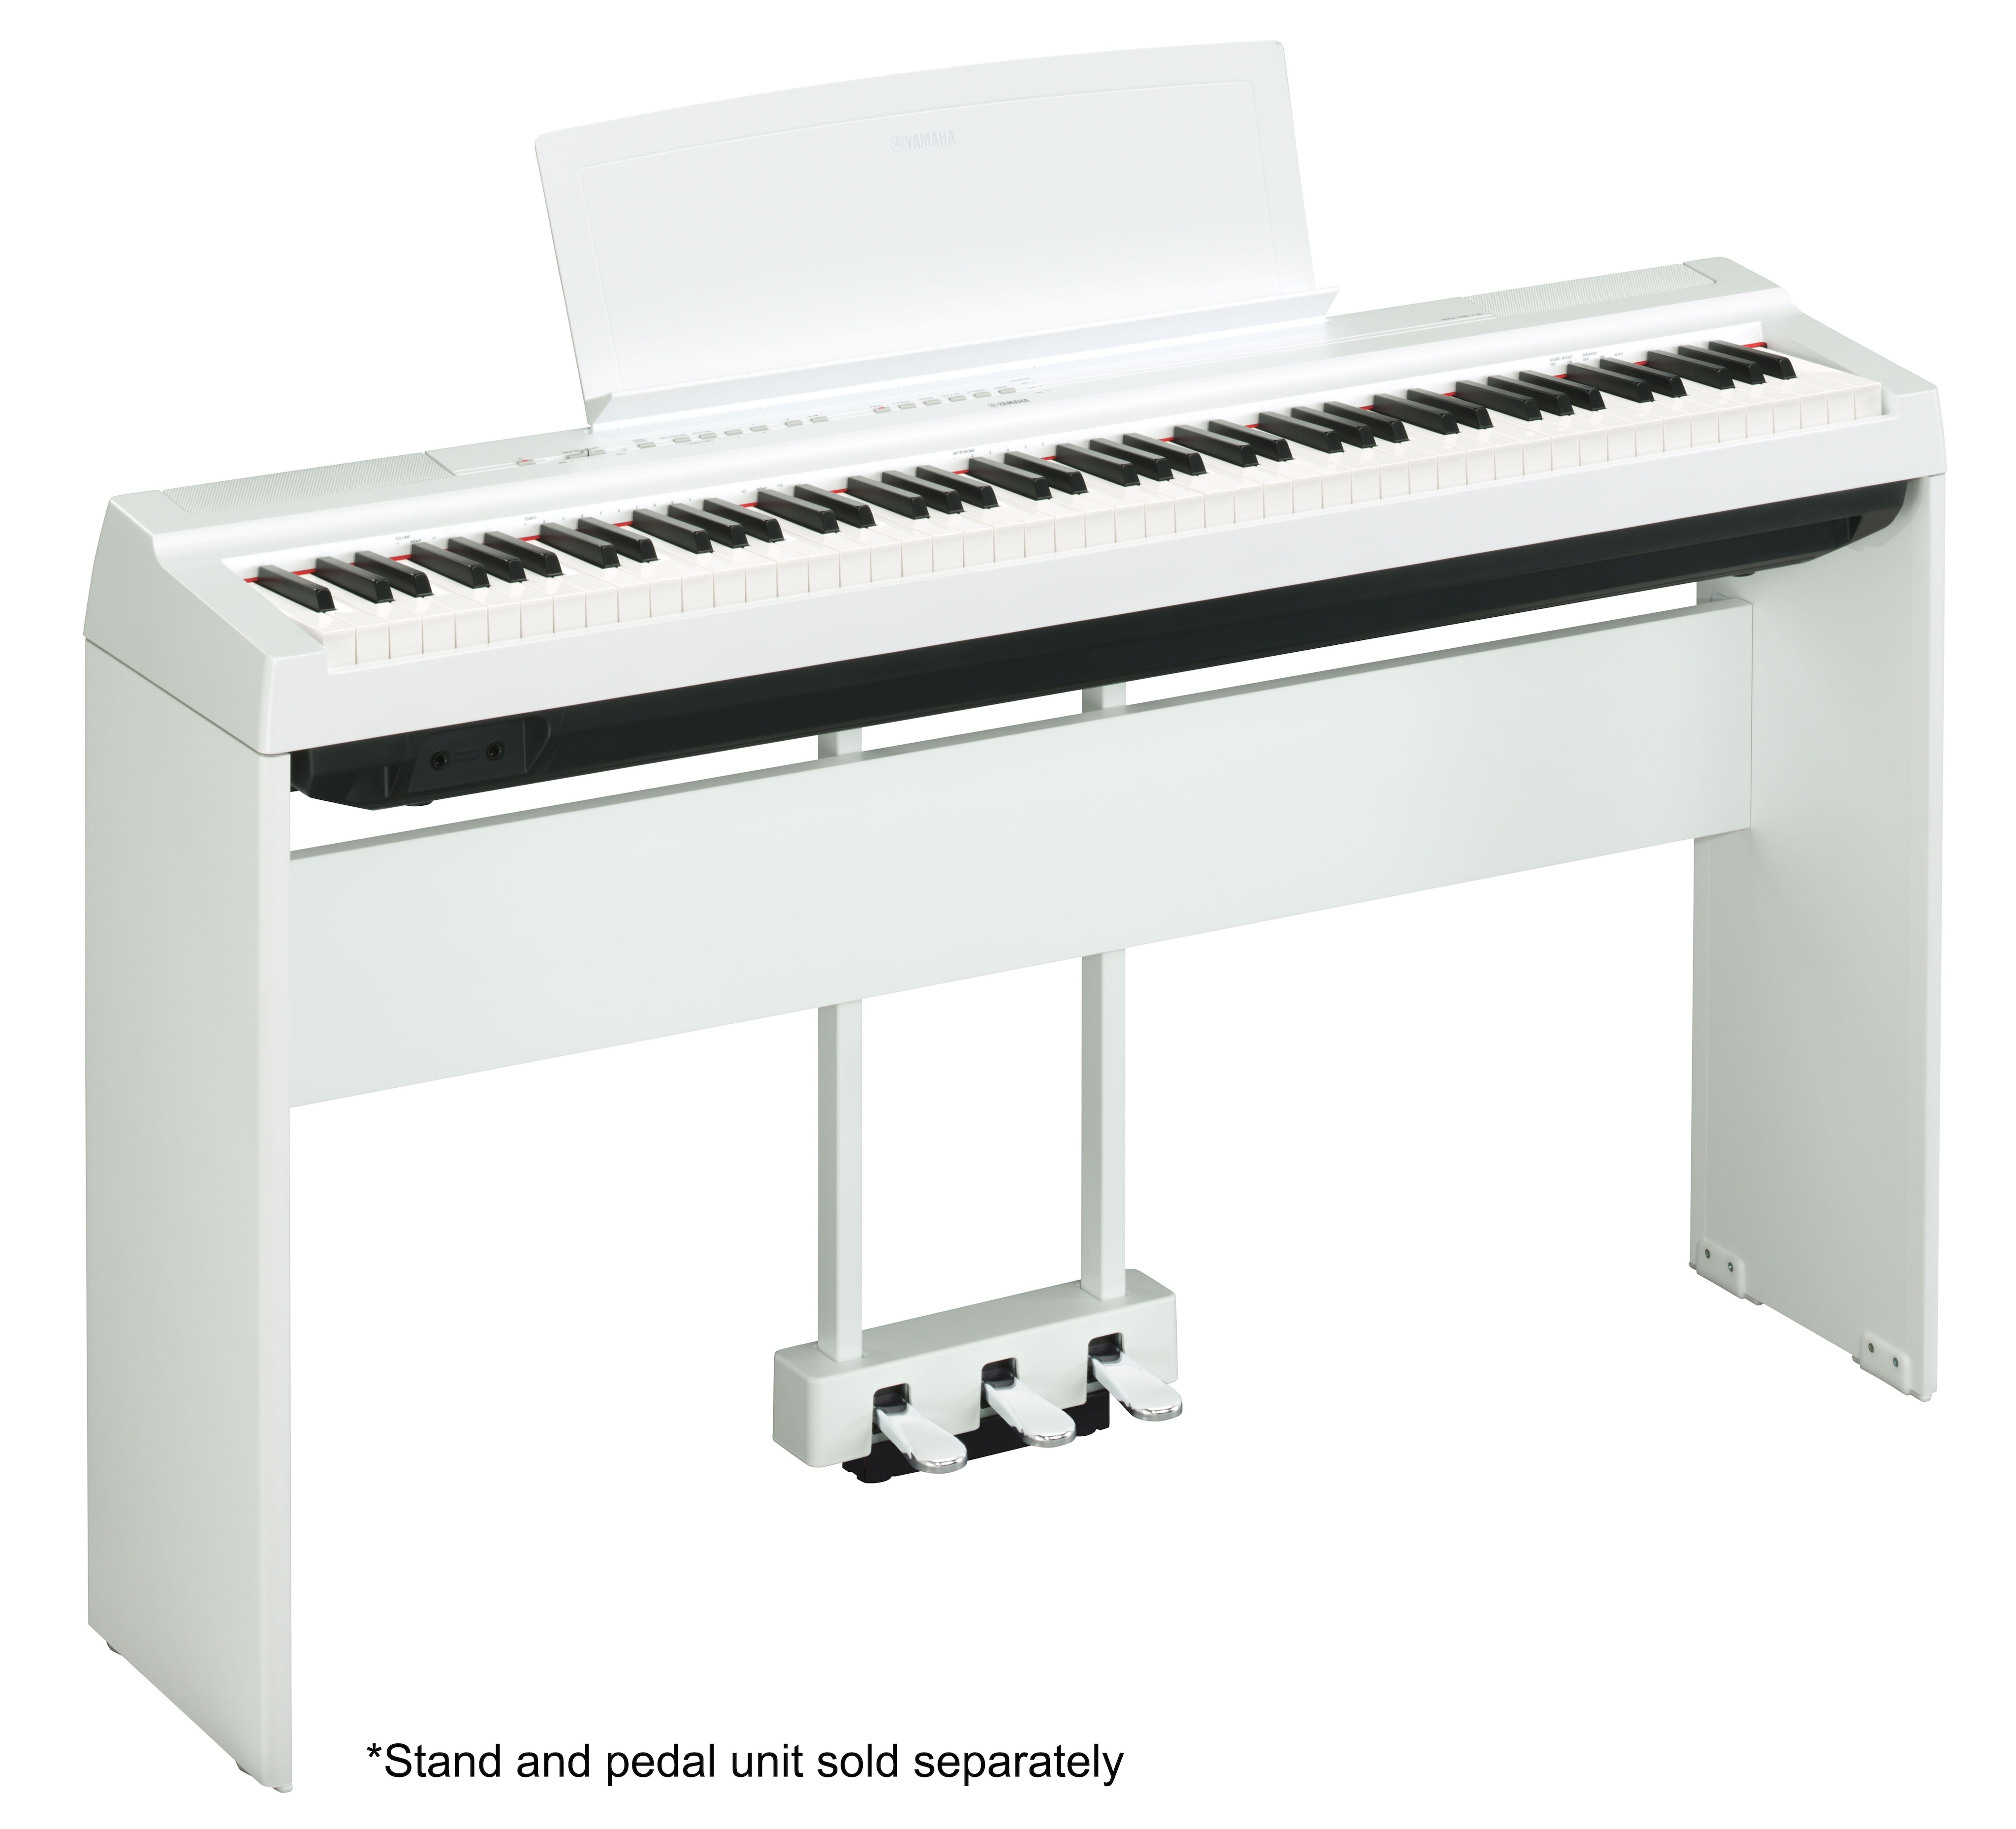 P-125 - Overview - Portables - Pianos - Musical Instruments 